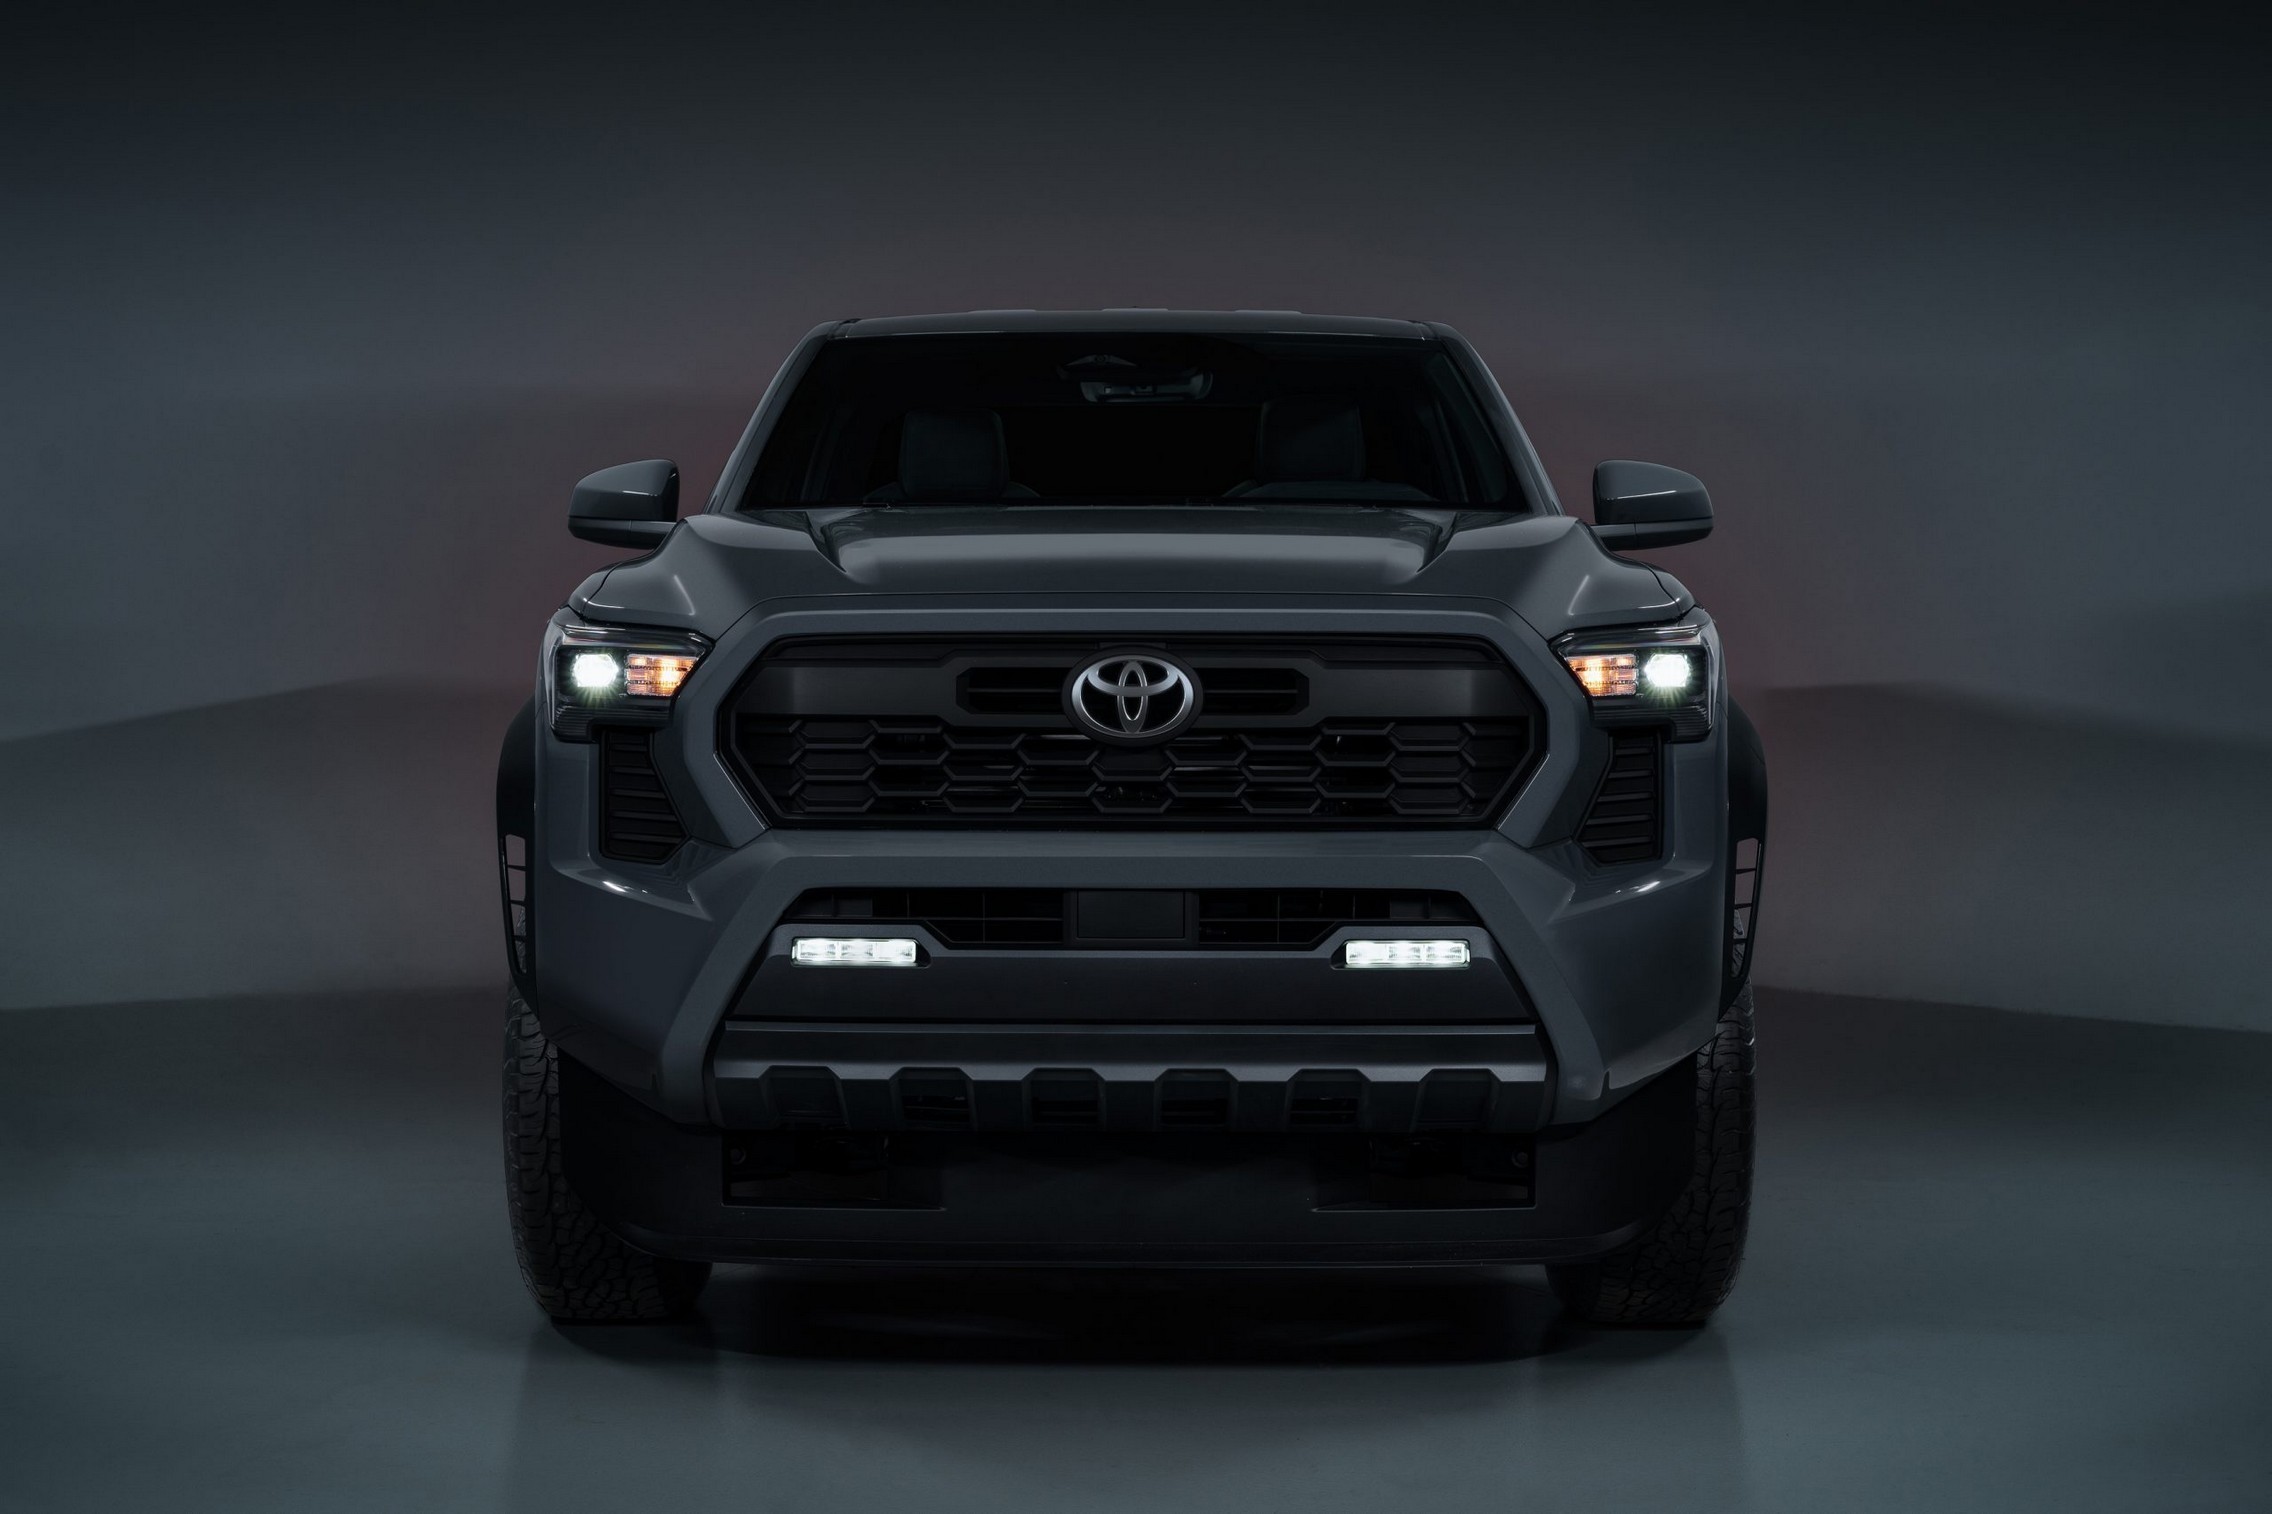 2024 Toyota Gr Tacoma Imagined In Hot Sporty Attire To Rival The Ford